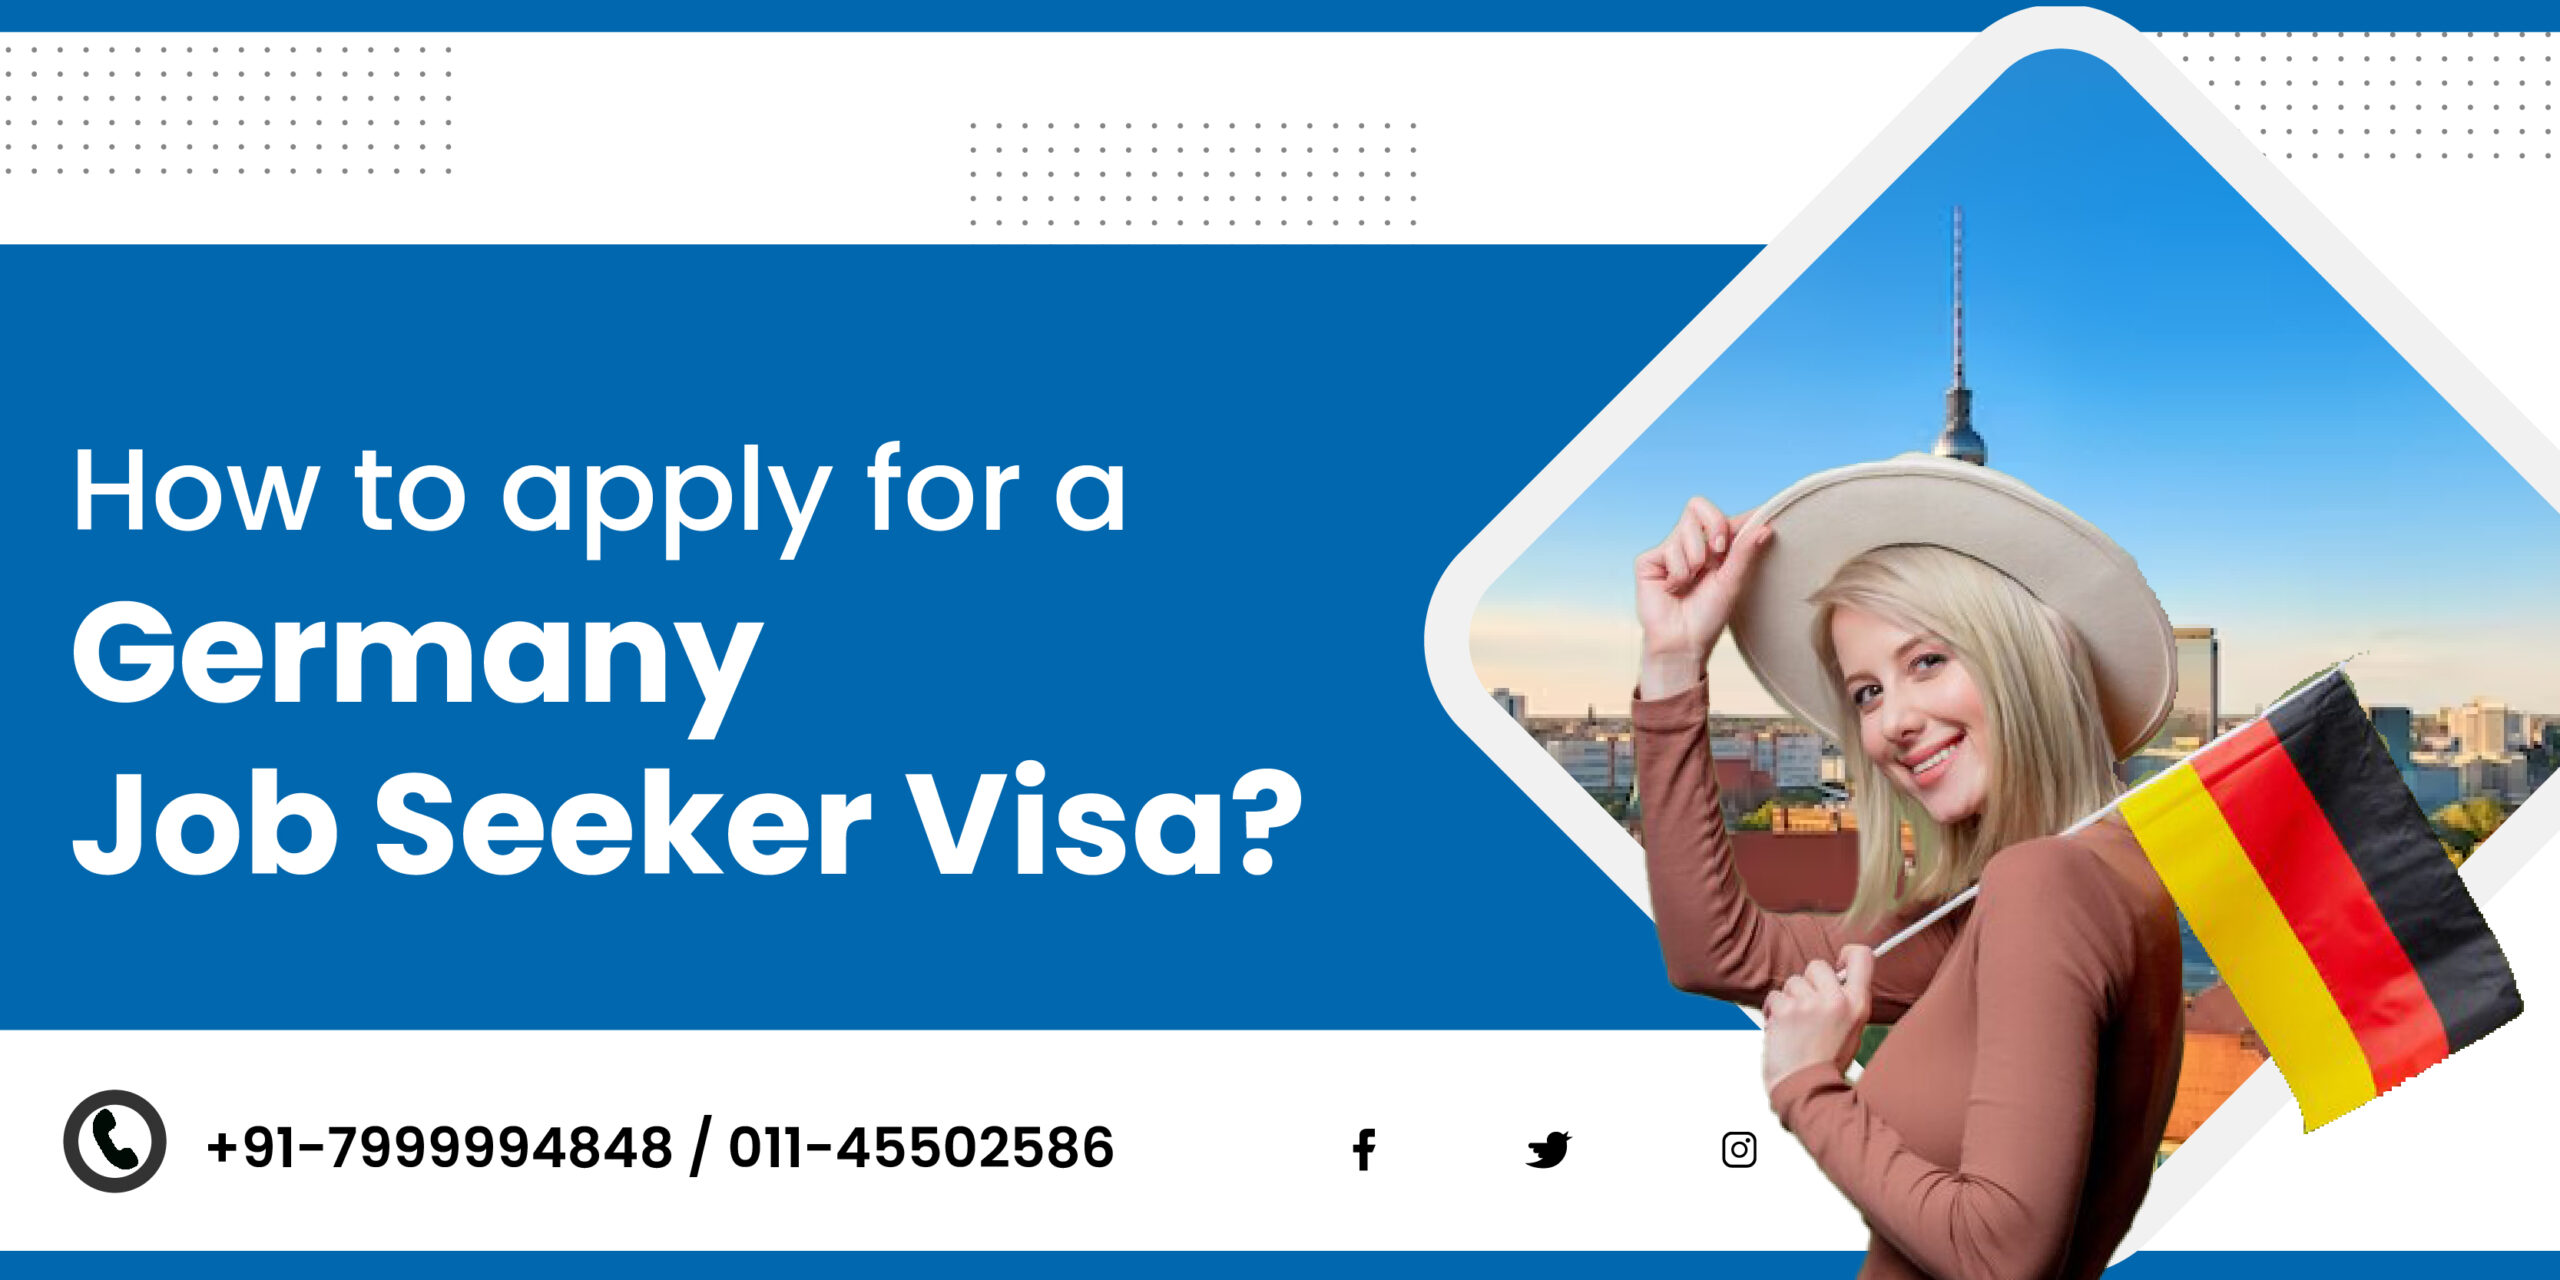 How to apply for a Germany Job Seeker Visa?